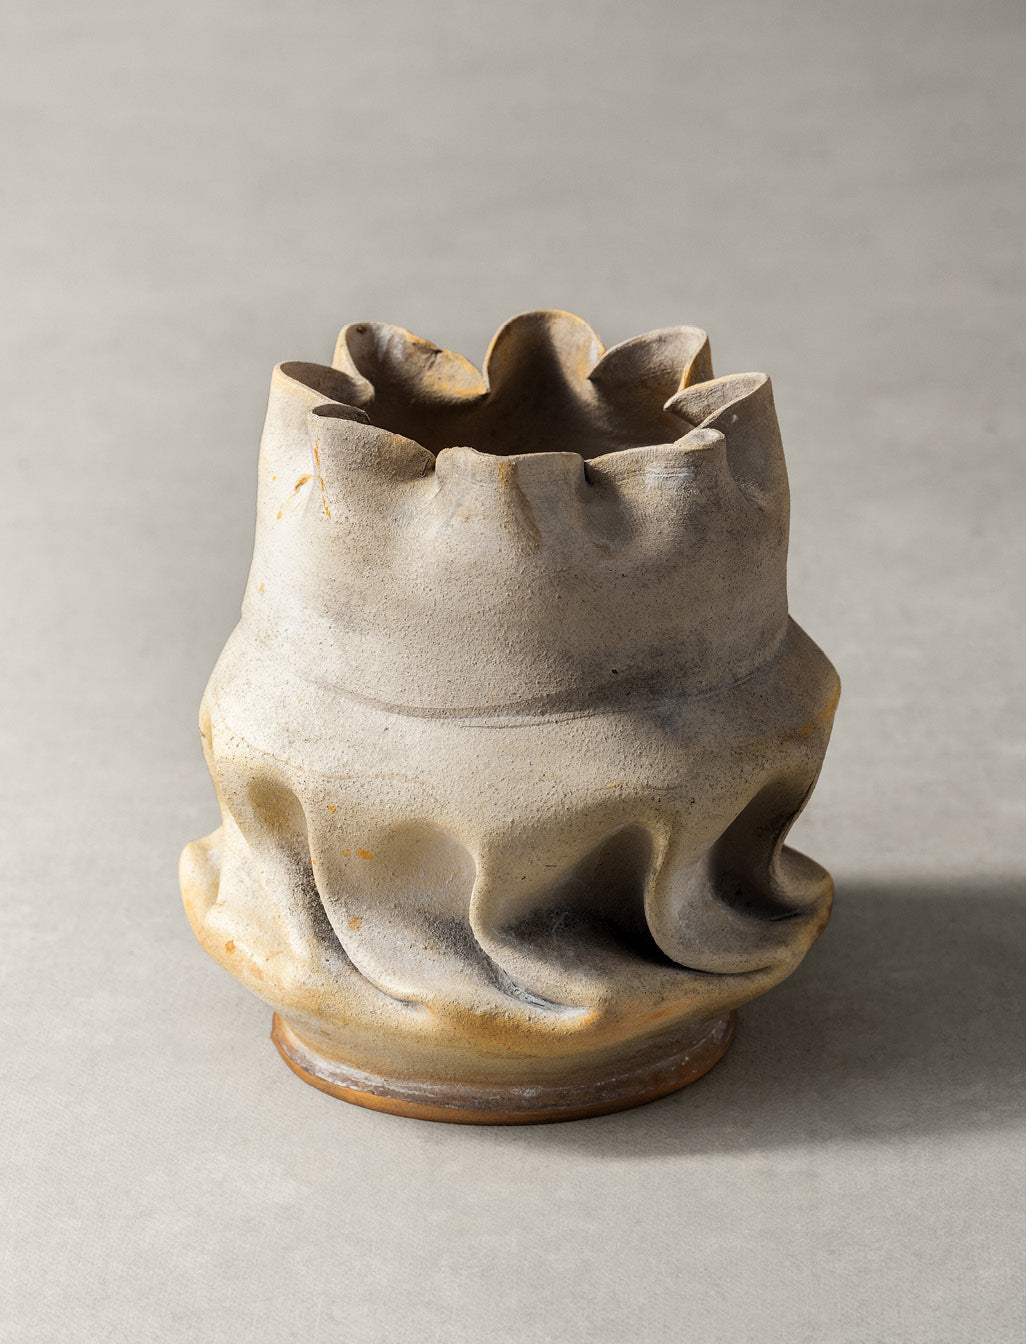 George E. Ohr, Buff Bisque Vase with In-Body Twist, Circa 1898-1910 (GOFM03)